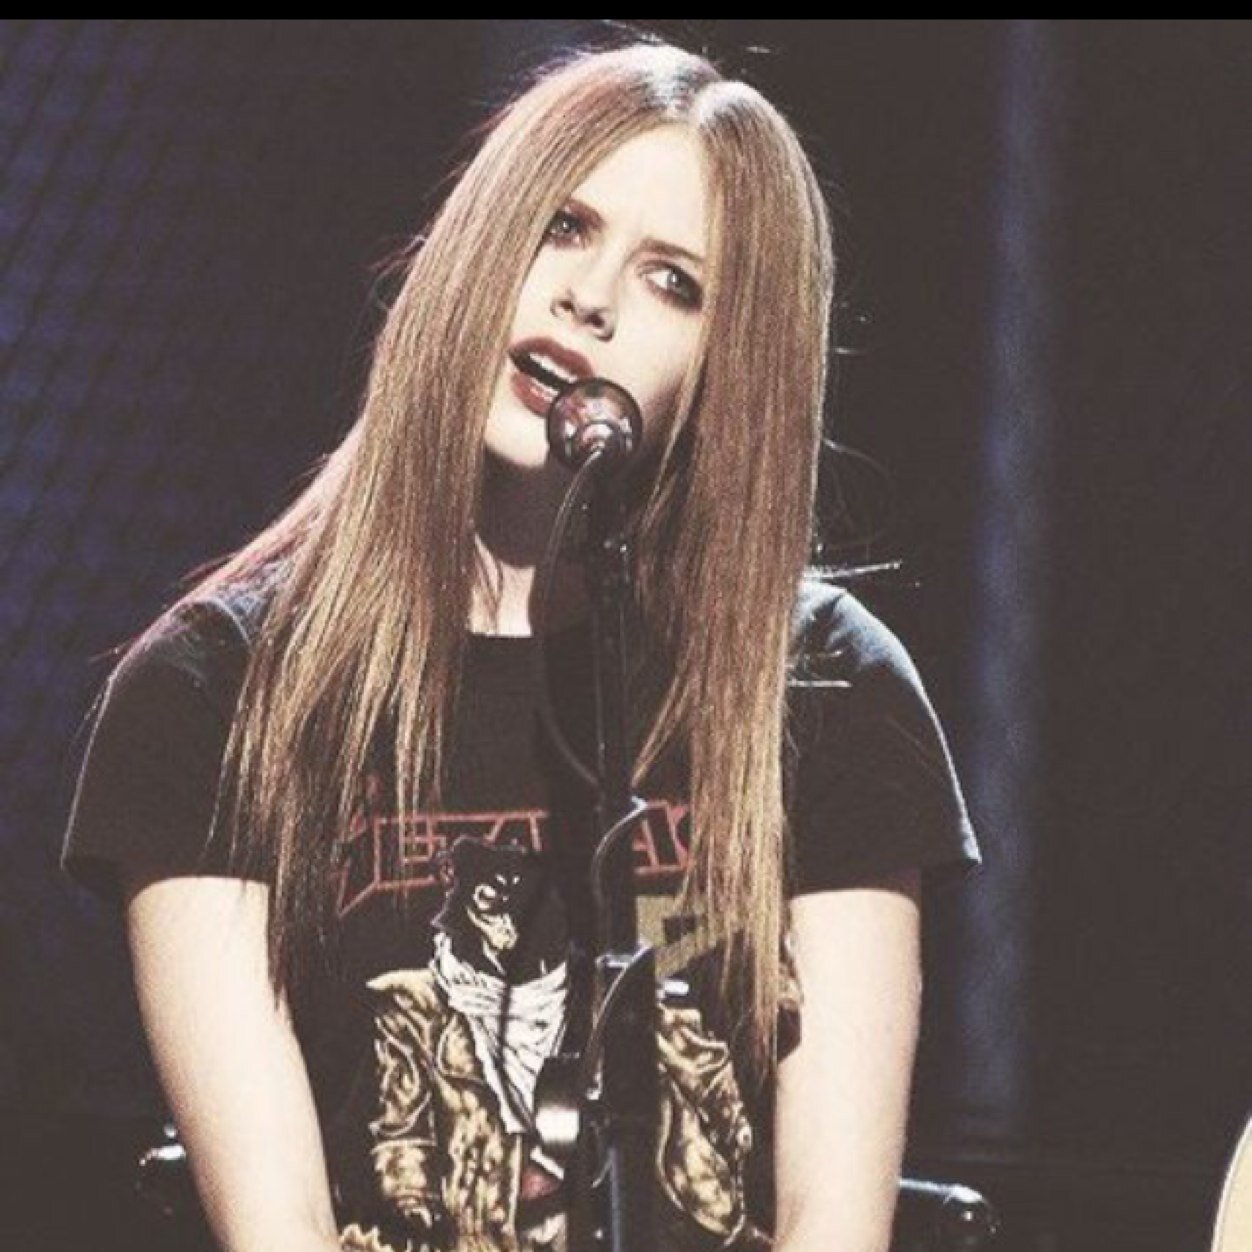 Avril Lavigne Daily I Can T Handle This Confusion I M Unable Come And Take Me Away Take Me Away Take Me Away Take Me Away Avrillavigne Http T Co Y8spl1qahy